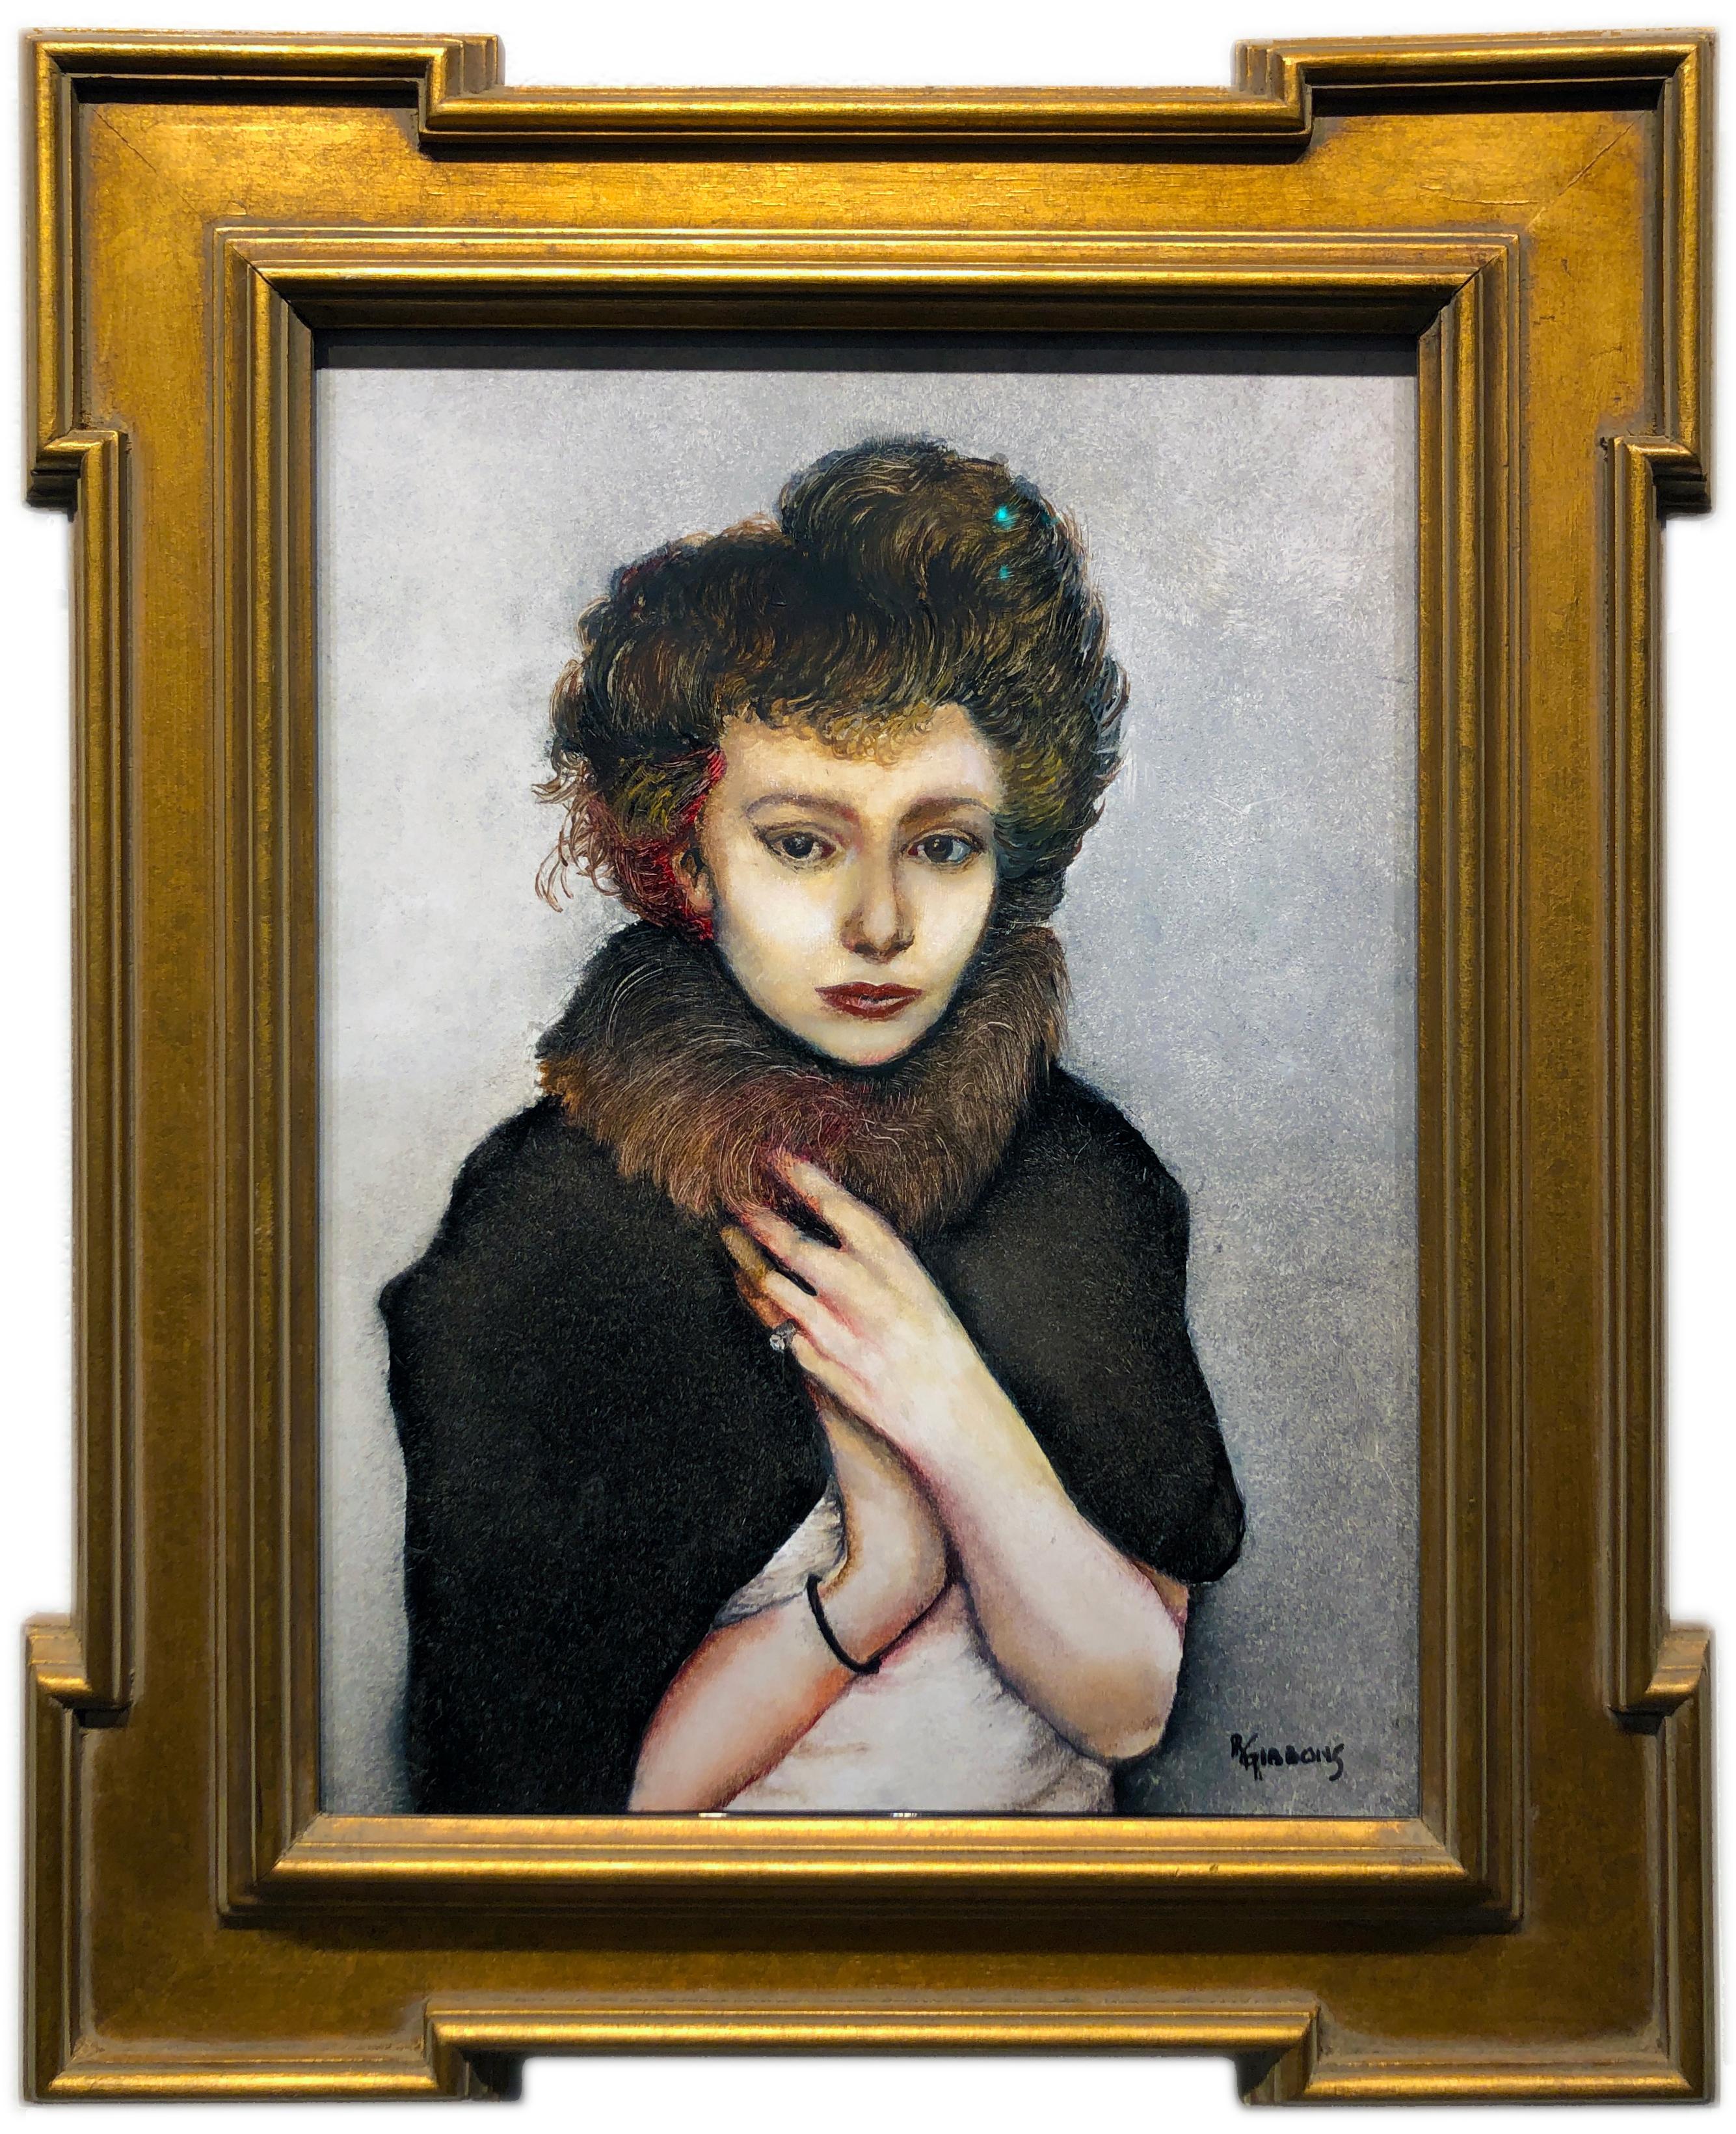 Richard Gibbons Portrait Painting - Remembering That Winter in Vienna, Portrait of a Women in Fur, Original Oil